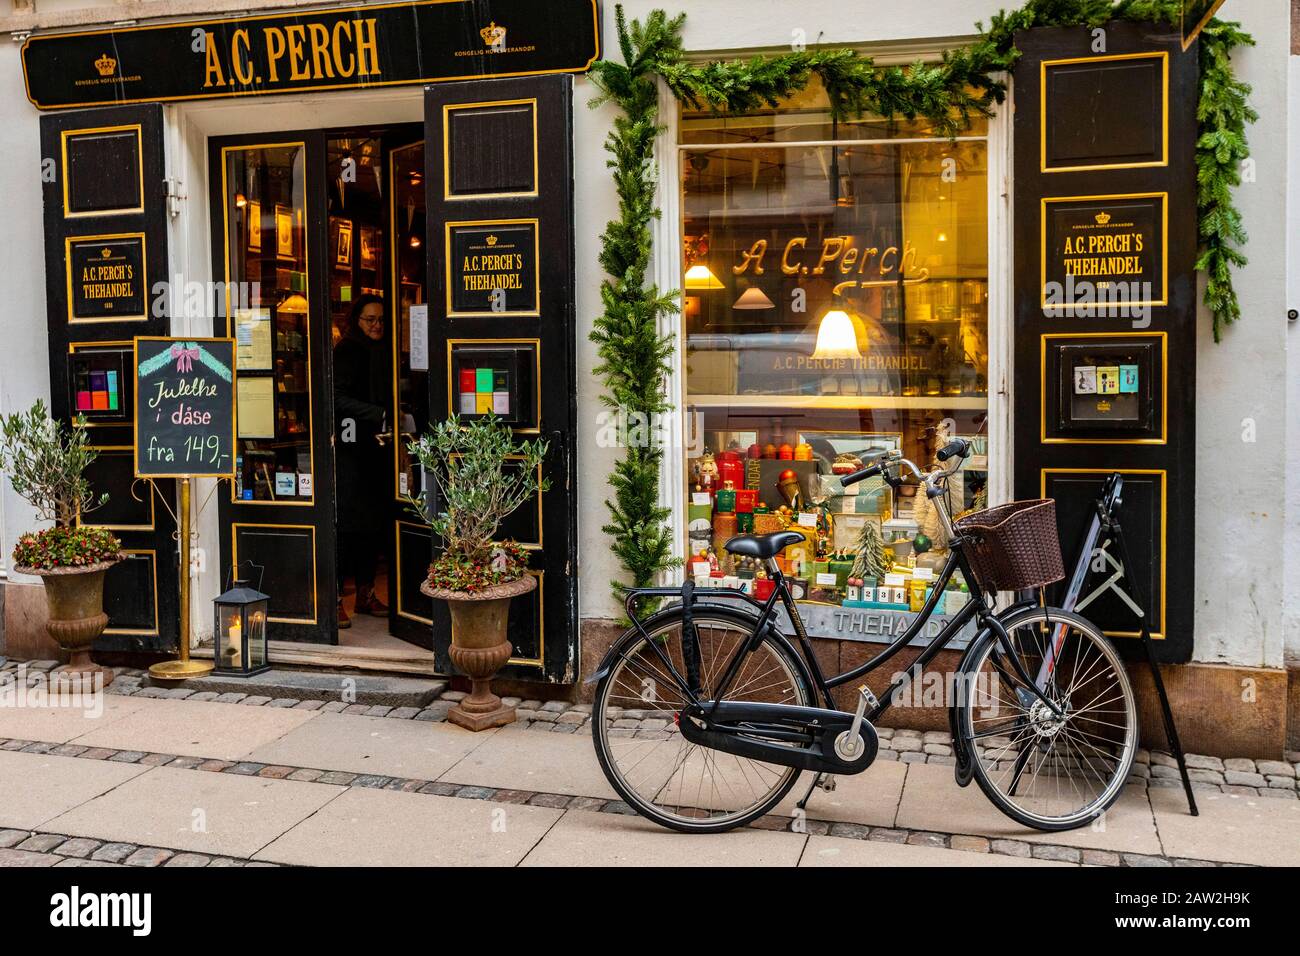 A C Perch Tea Shop High Resolution Stock Photography and Images - Alamy